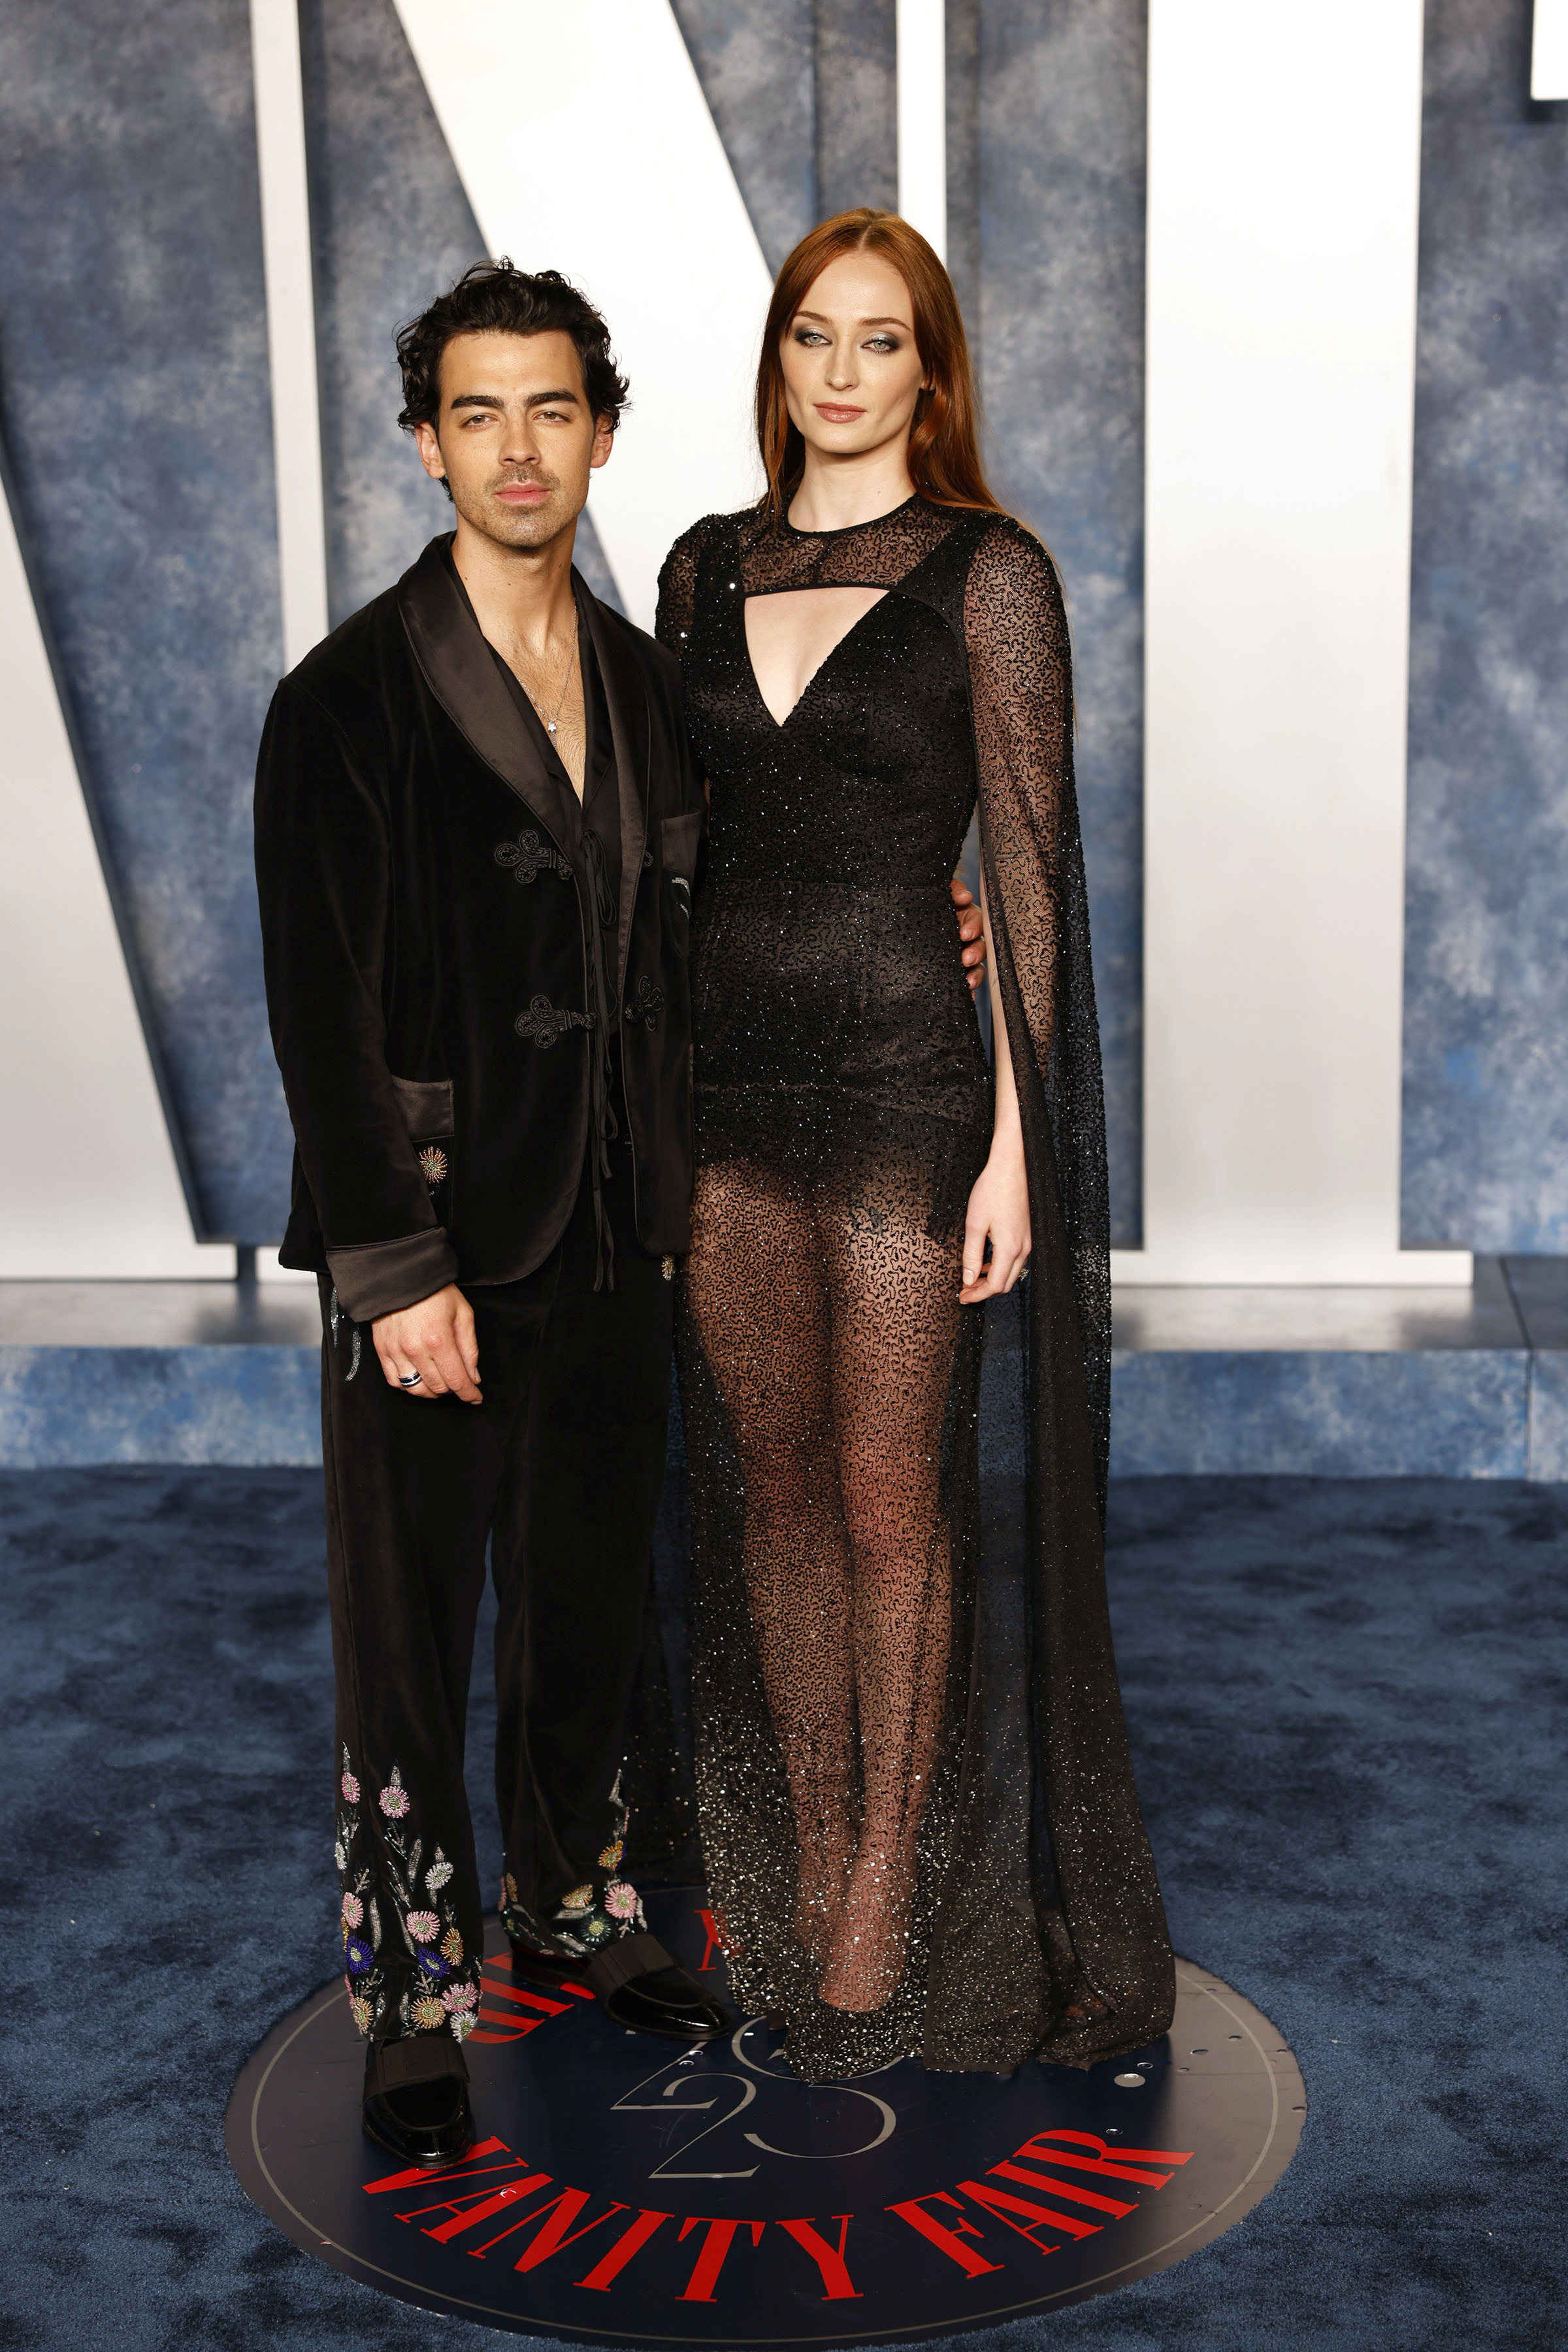 Joe Jonas and Sophie Turner pictured together at the 2023 Vanity Fair Oscars party